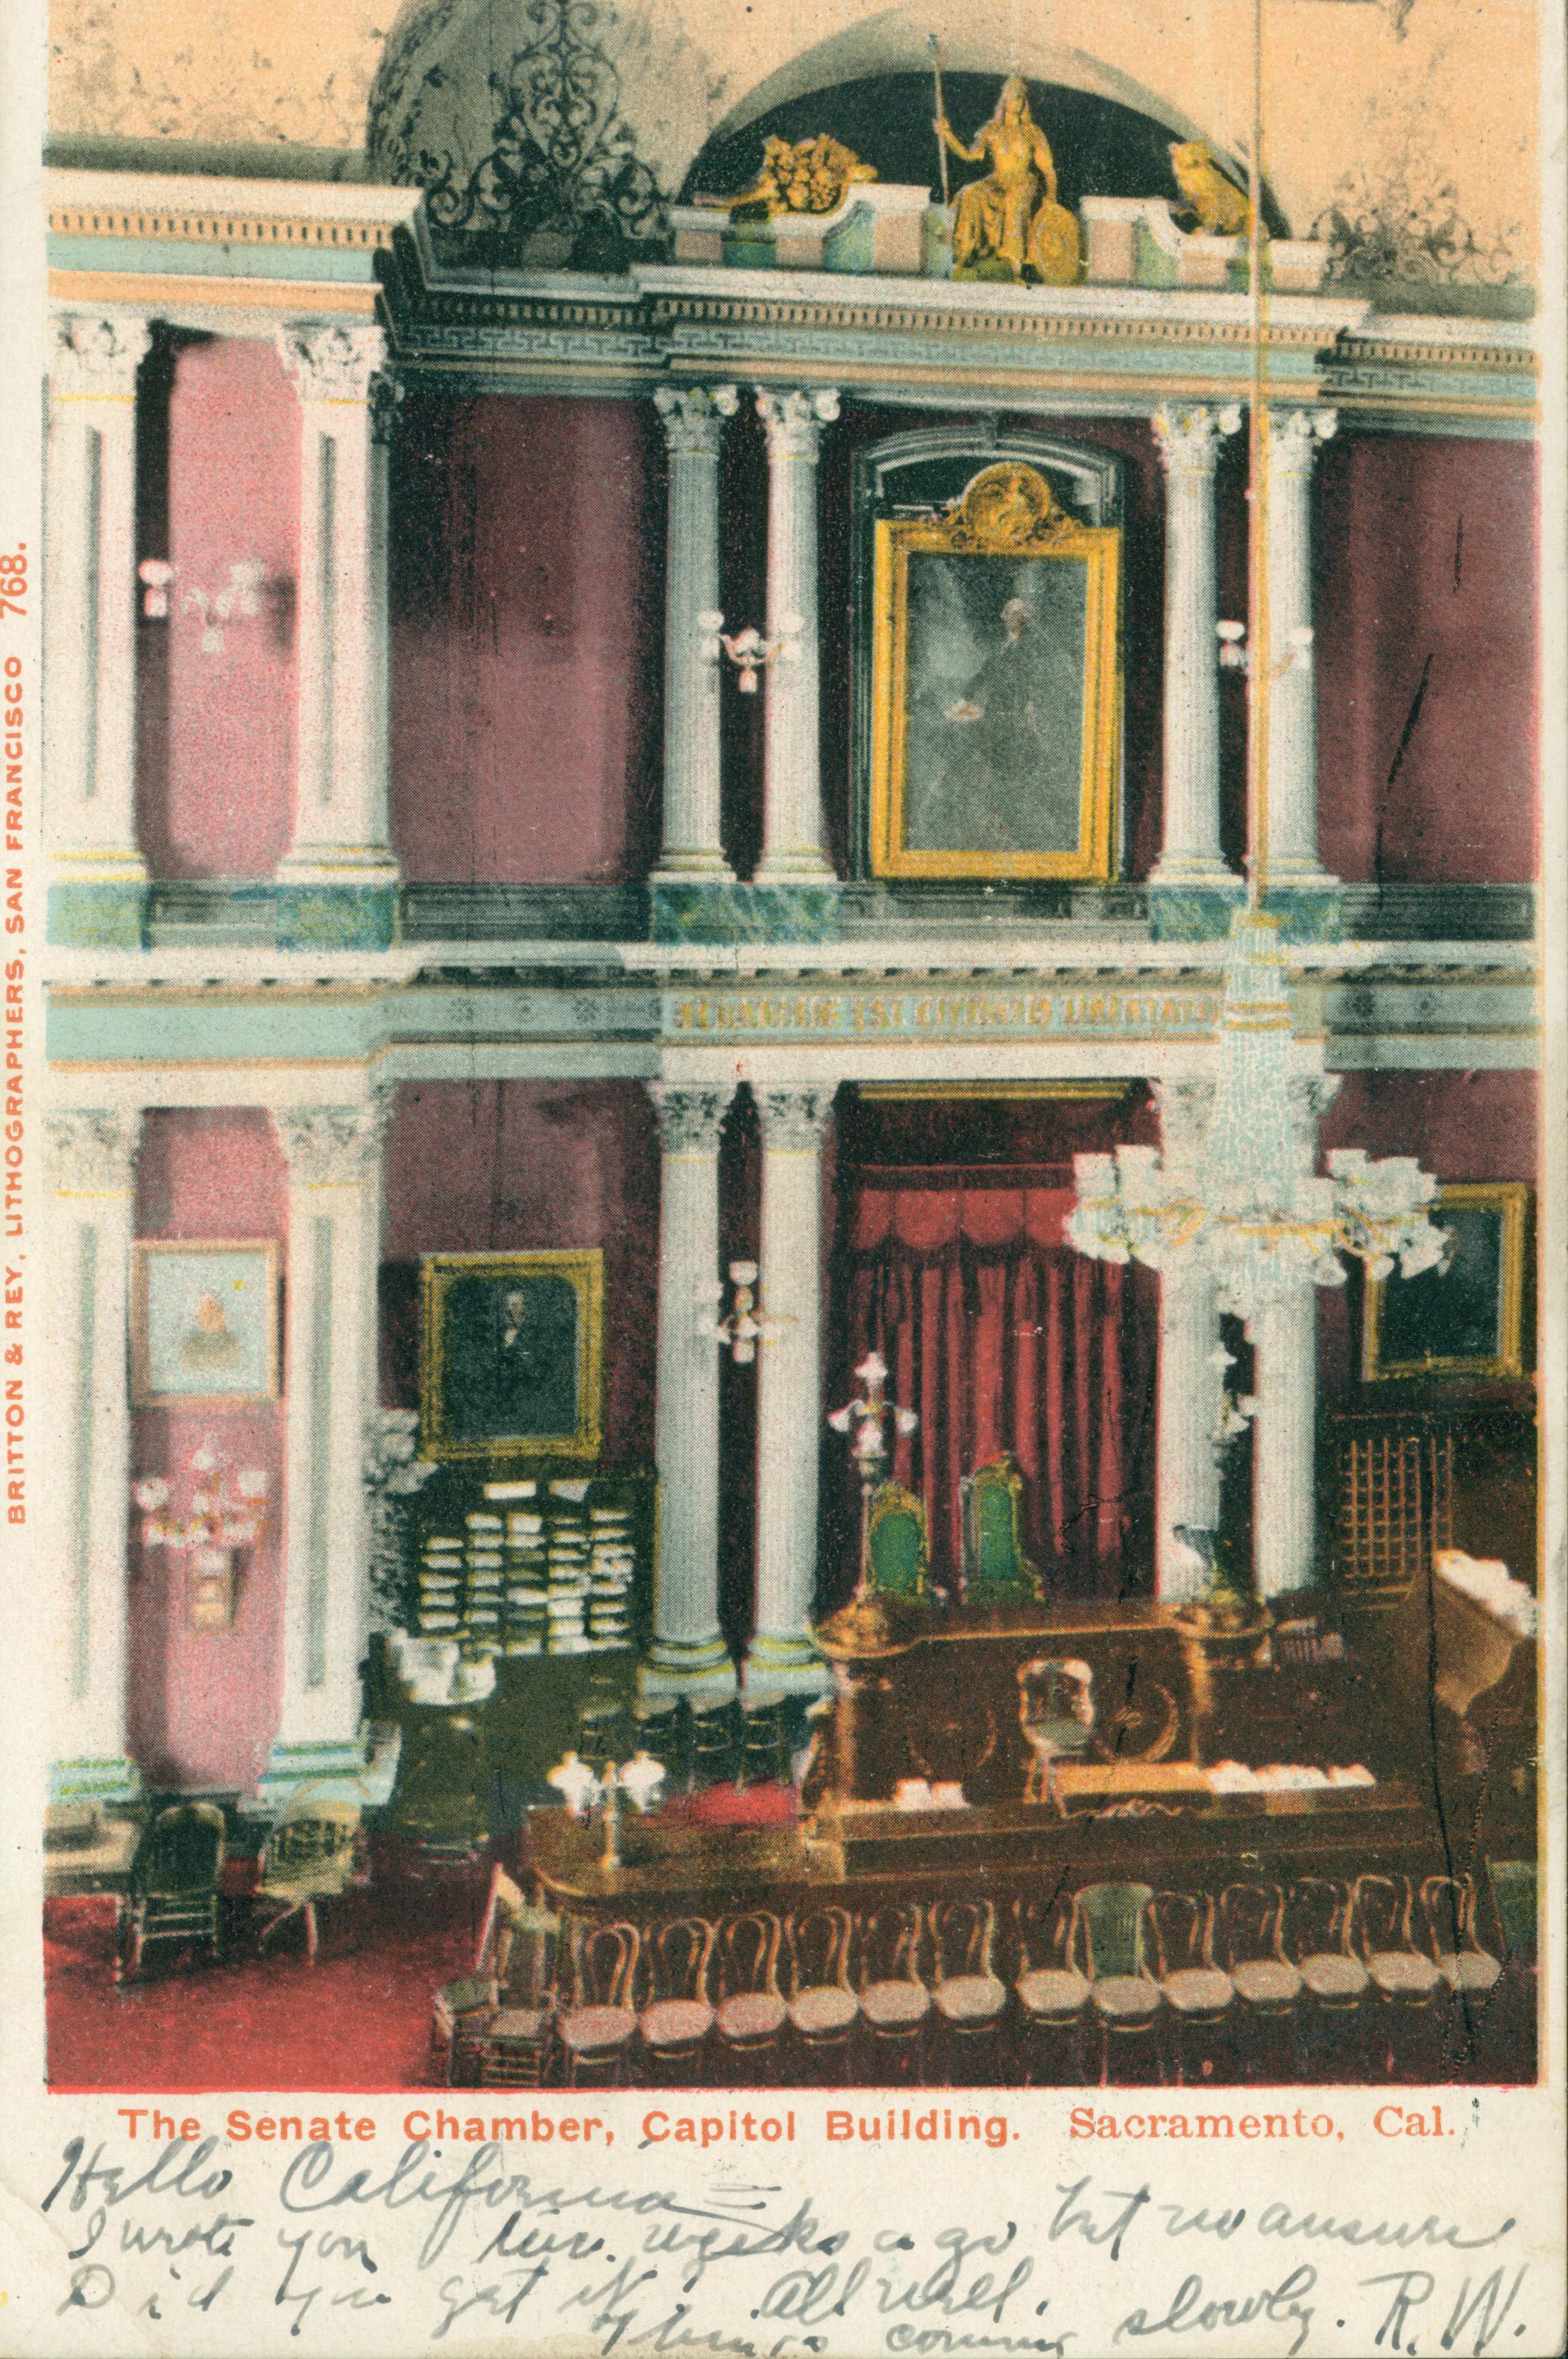 This postcard shows the Senate Chamber rostrum in the California State Capitol.